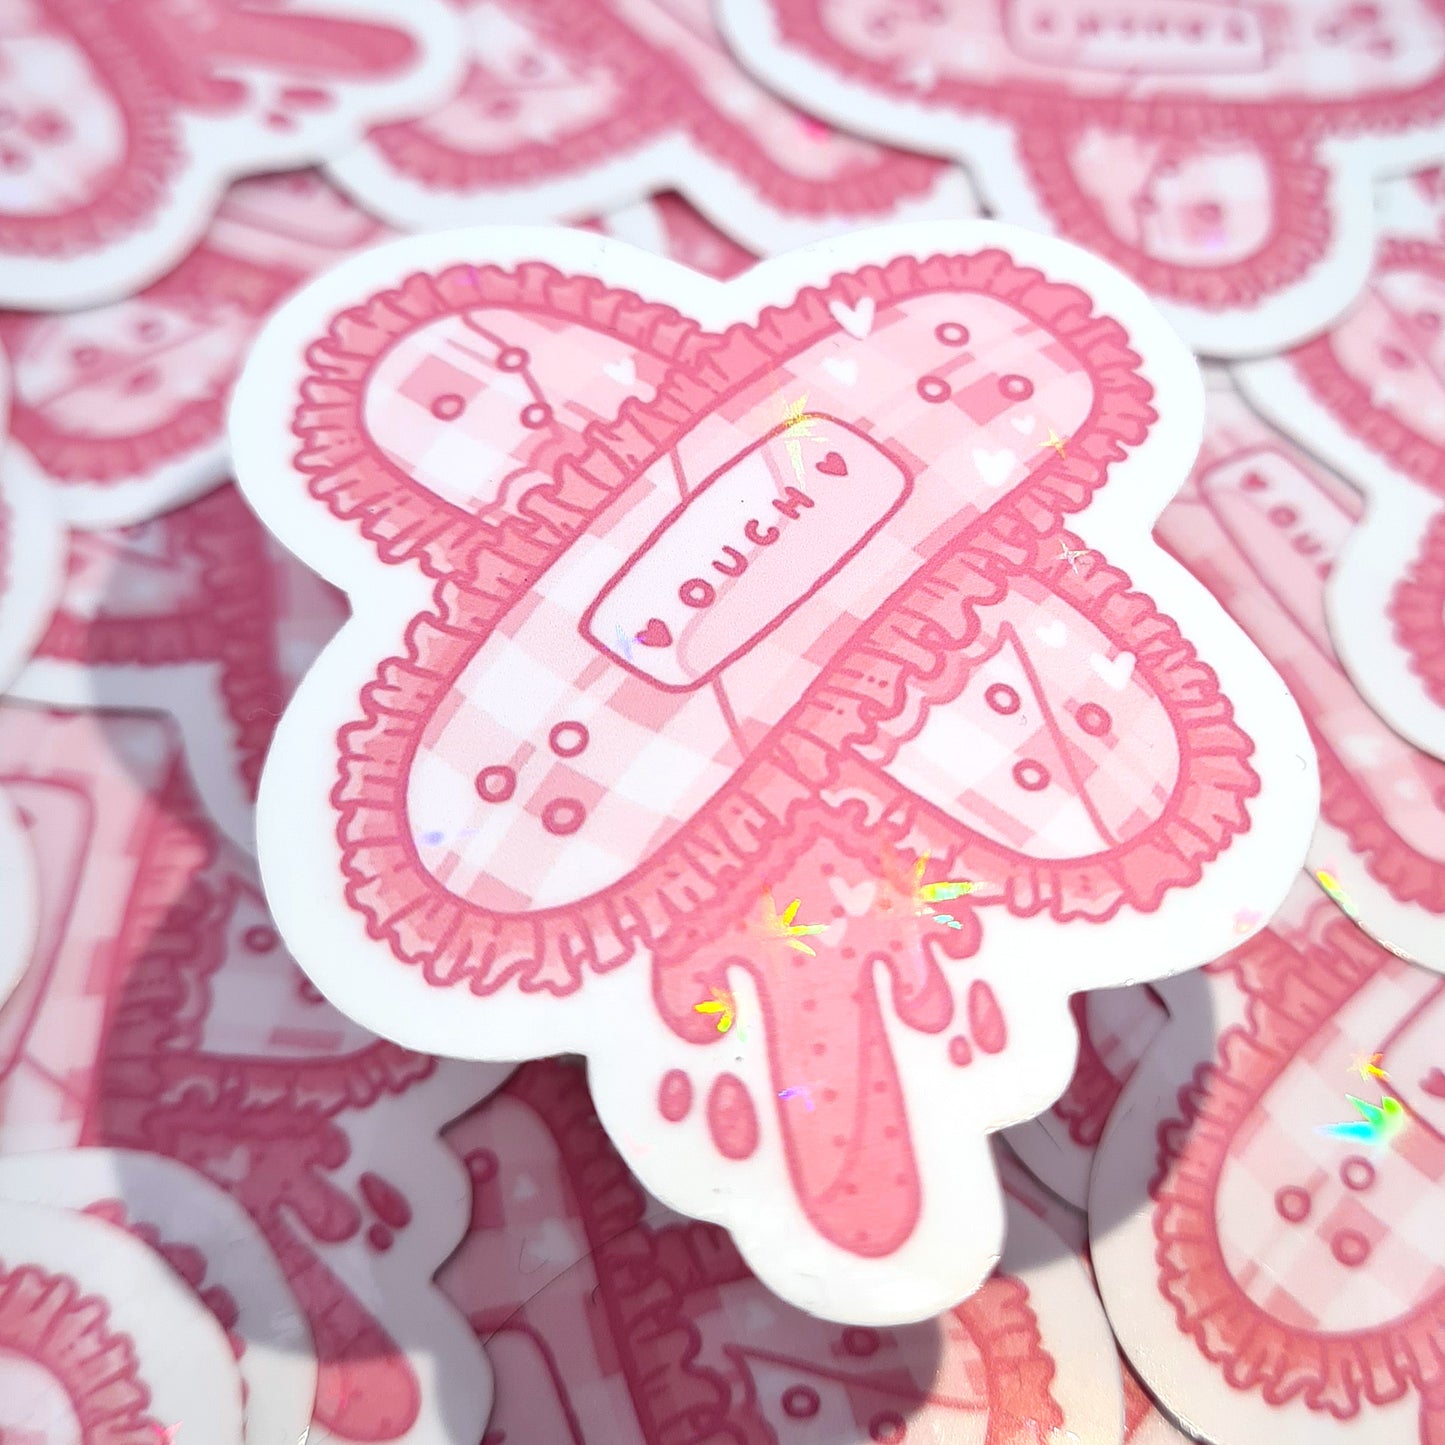 Sickly Sweet Ouch Band-aid Waterproof Die Cut Sticker